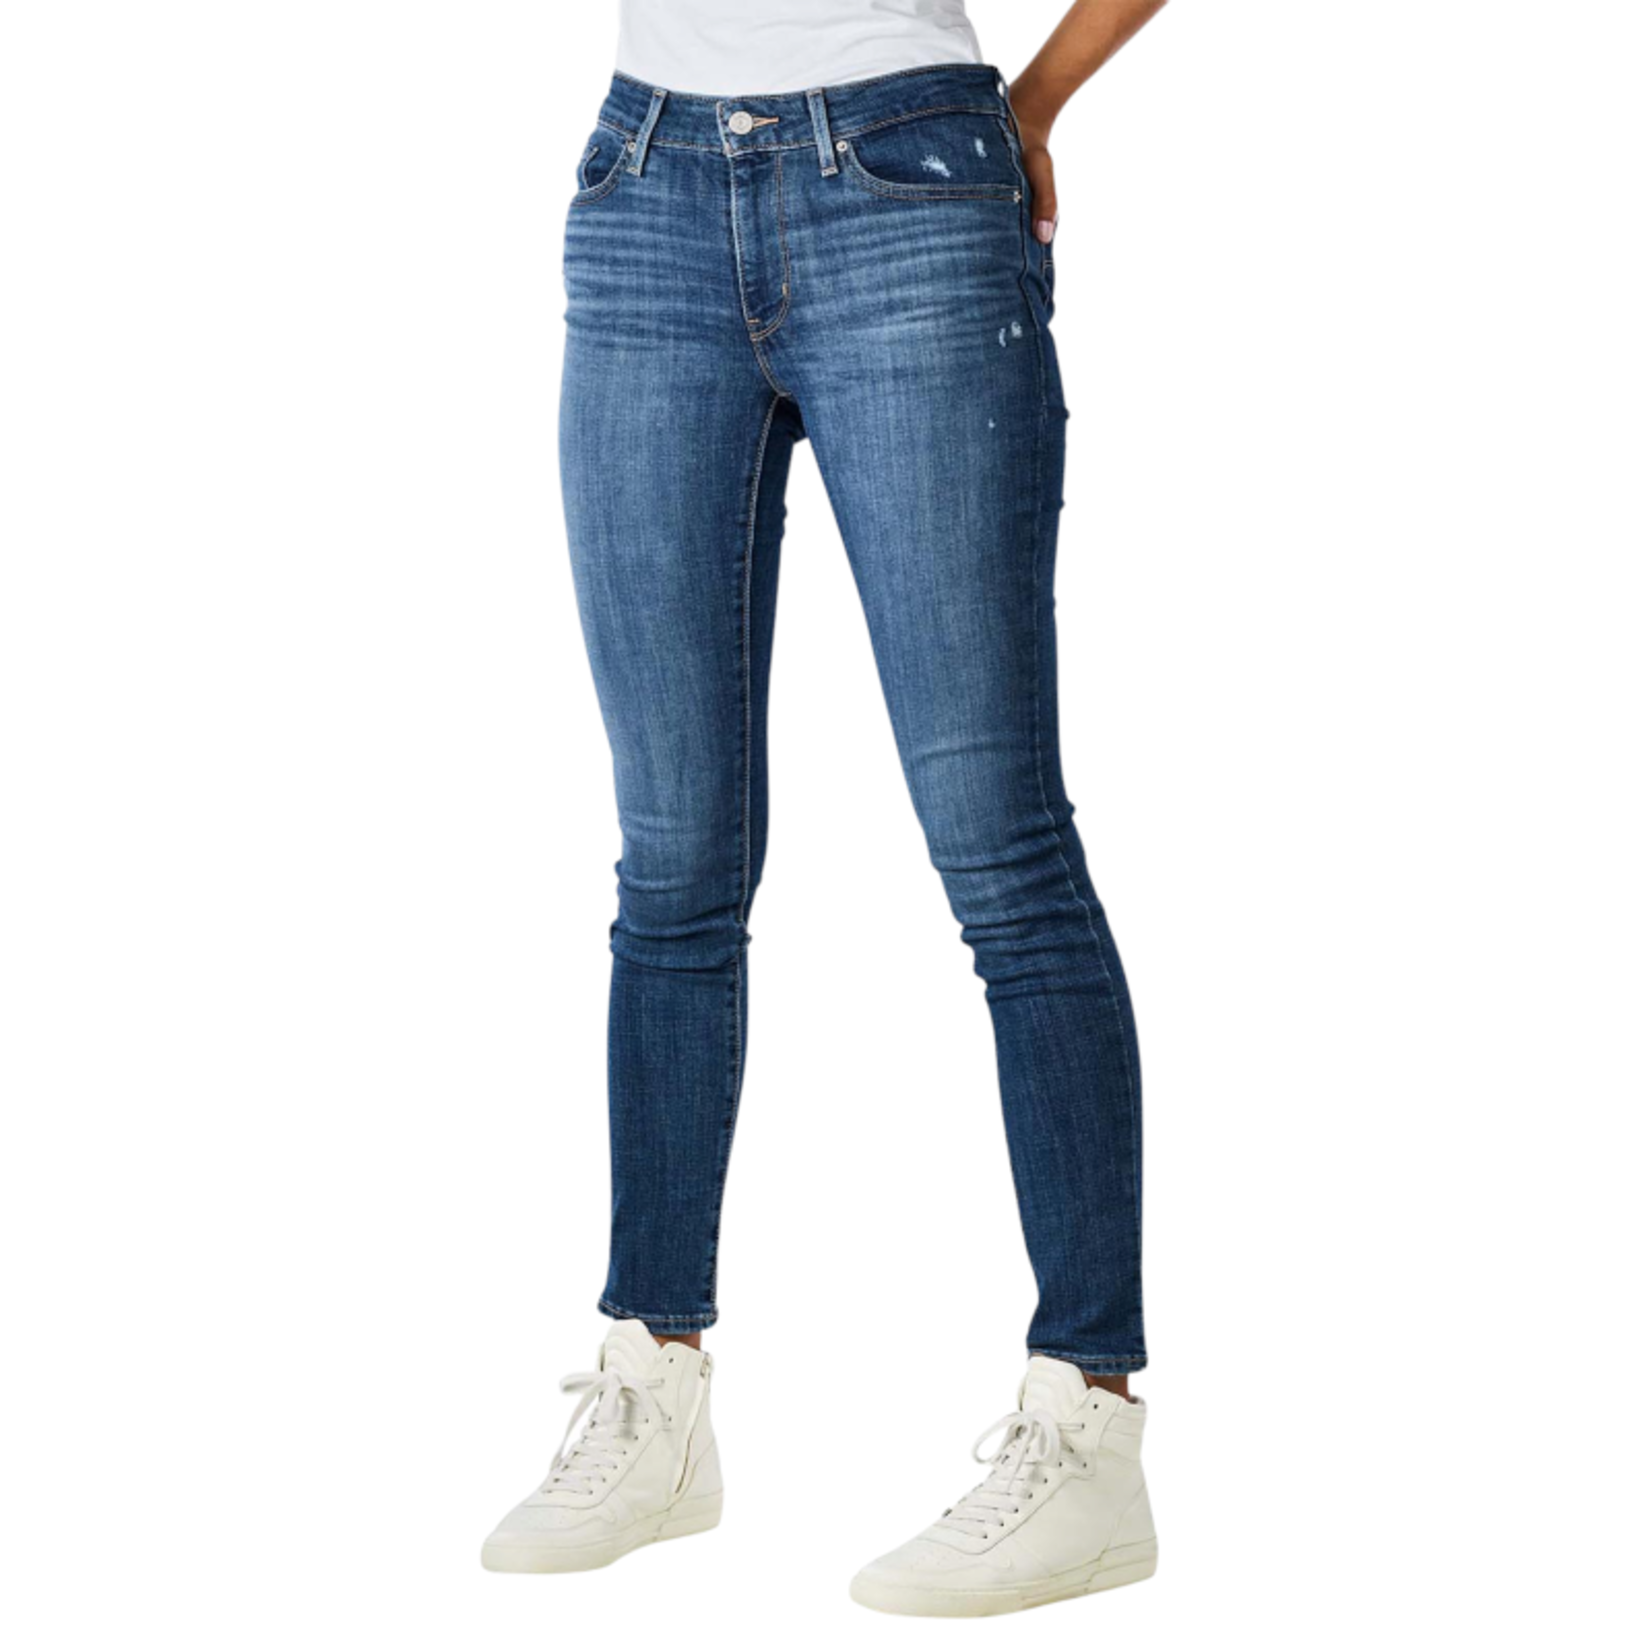 LEVI'S 711 SKINNY MID RISE JEAN 18881-0633 - Michael's and Jody's